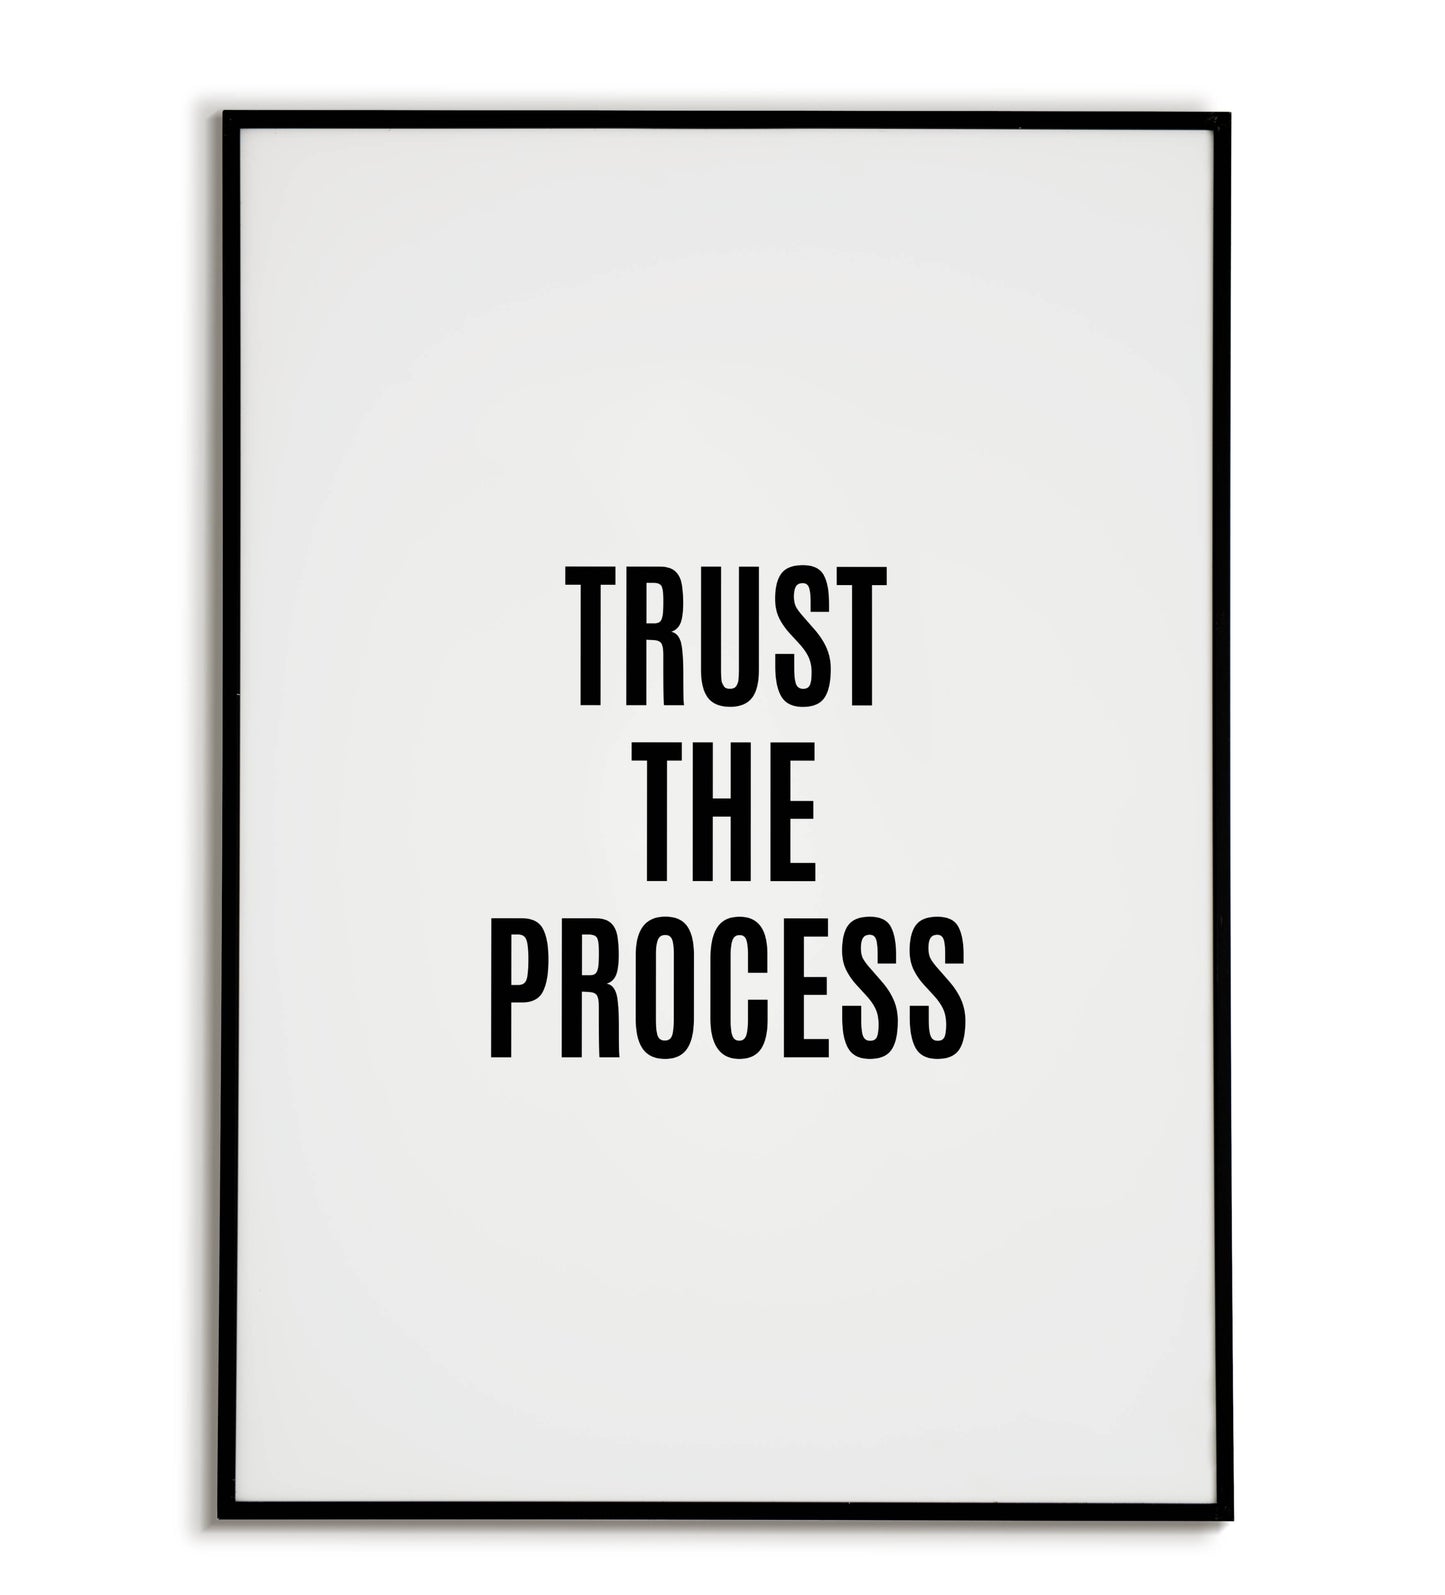 Trust the process - Printable Wall Art / Poster. Download this design to enhance your space.	